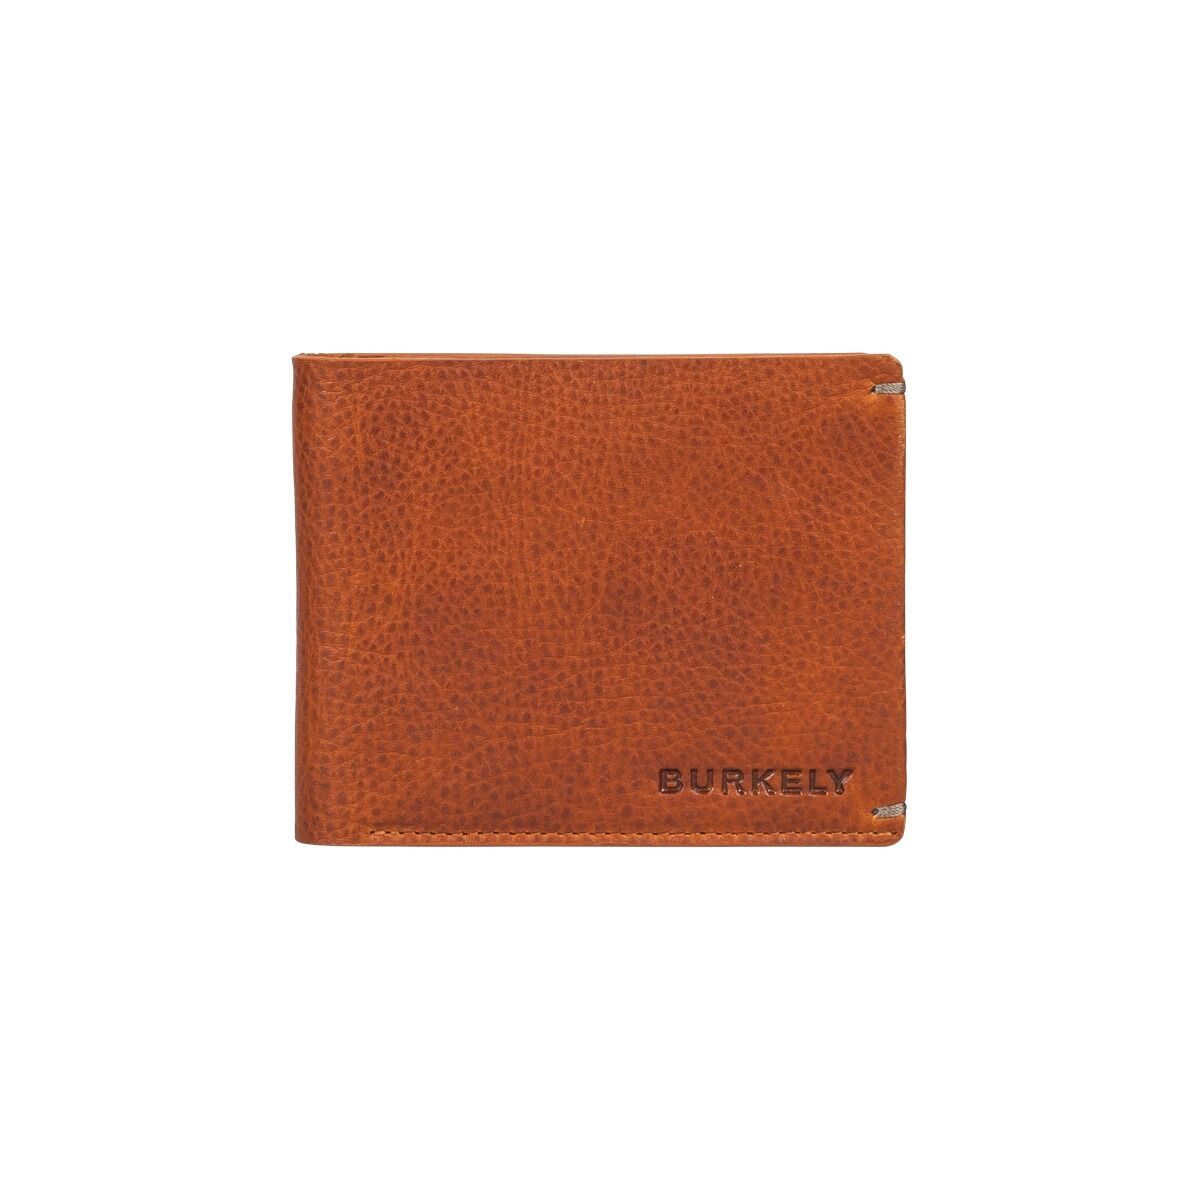 Burkely Antique Avery Billfold Low Coin wallet-Cognac